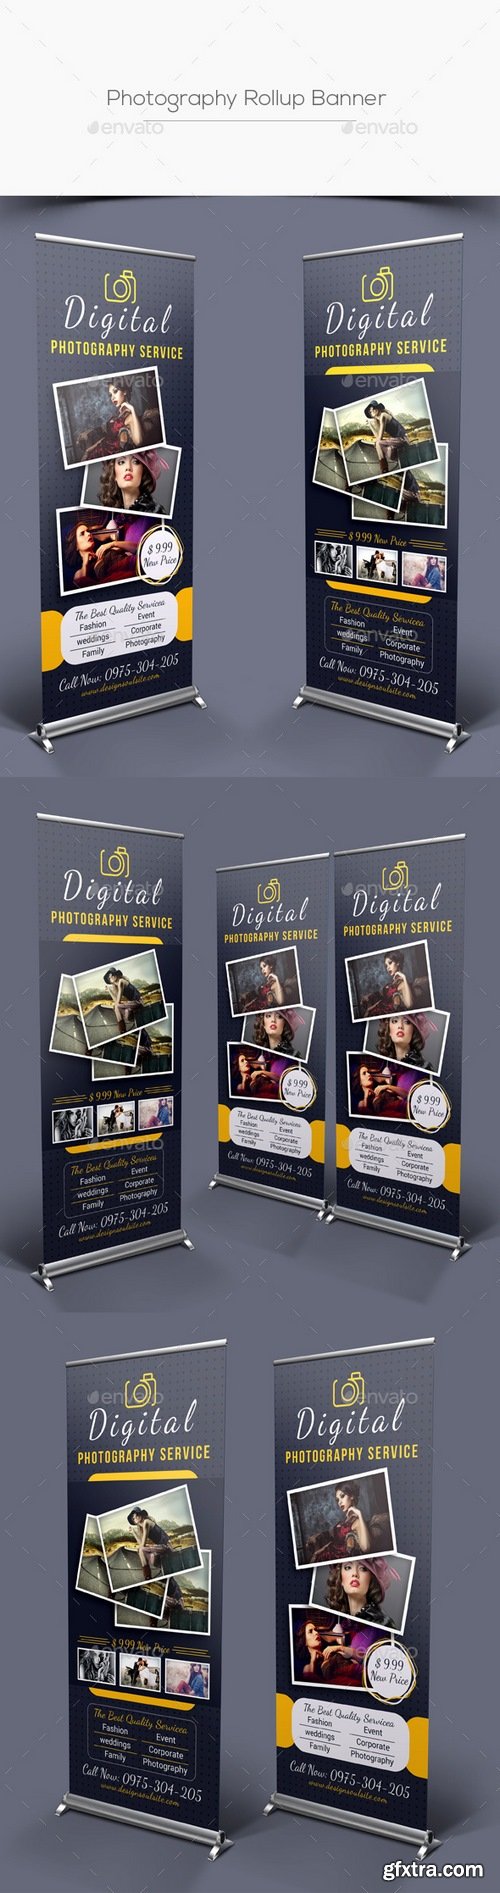 Graphicriver - Photography Rollup Banner 21036673